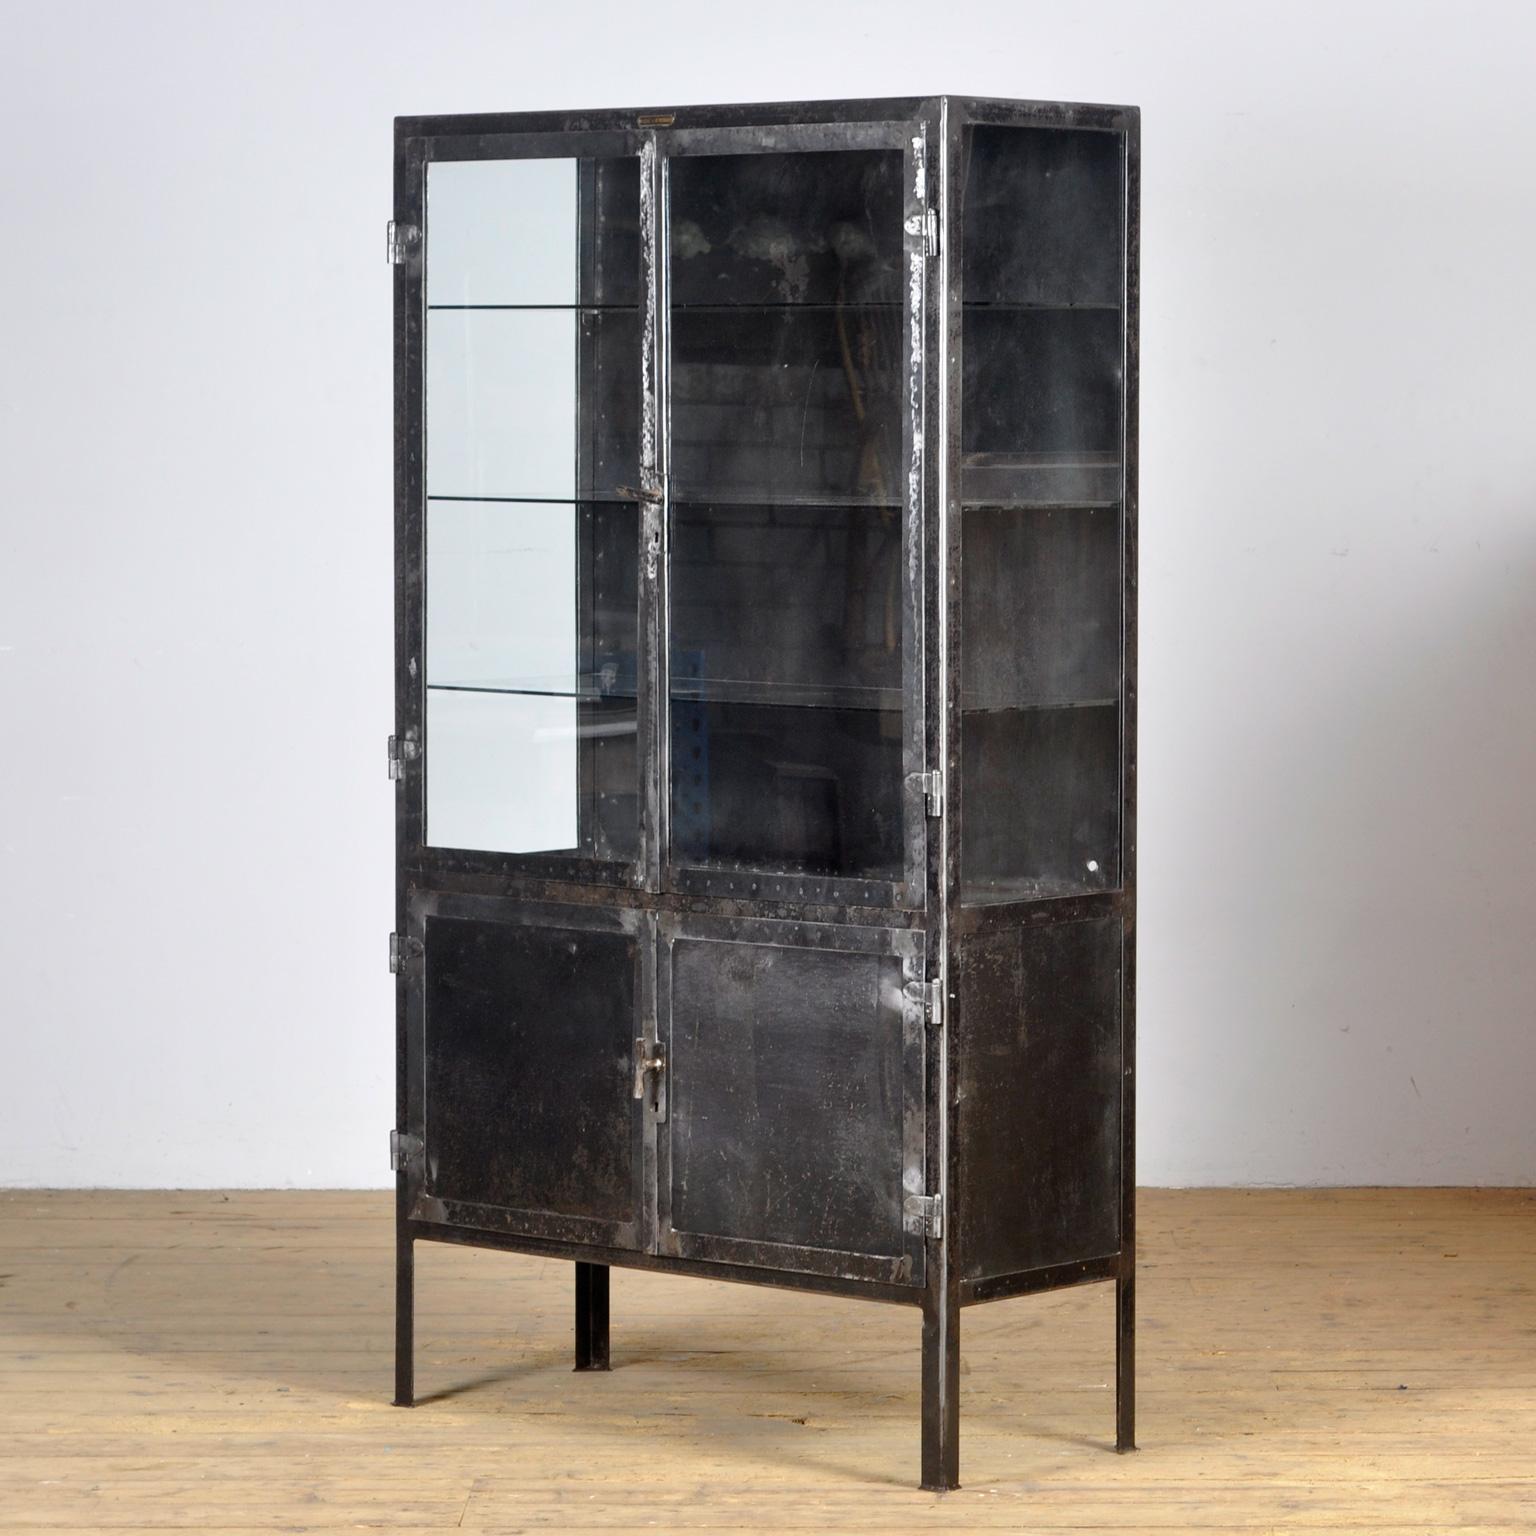 Hungarian Vintage Glass & Iron Medical Cabinet, 1950s